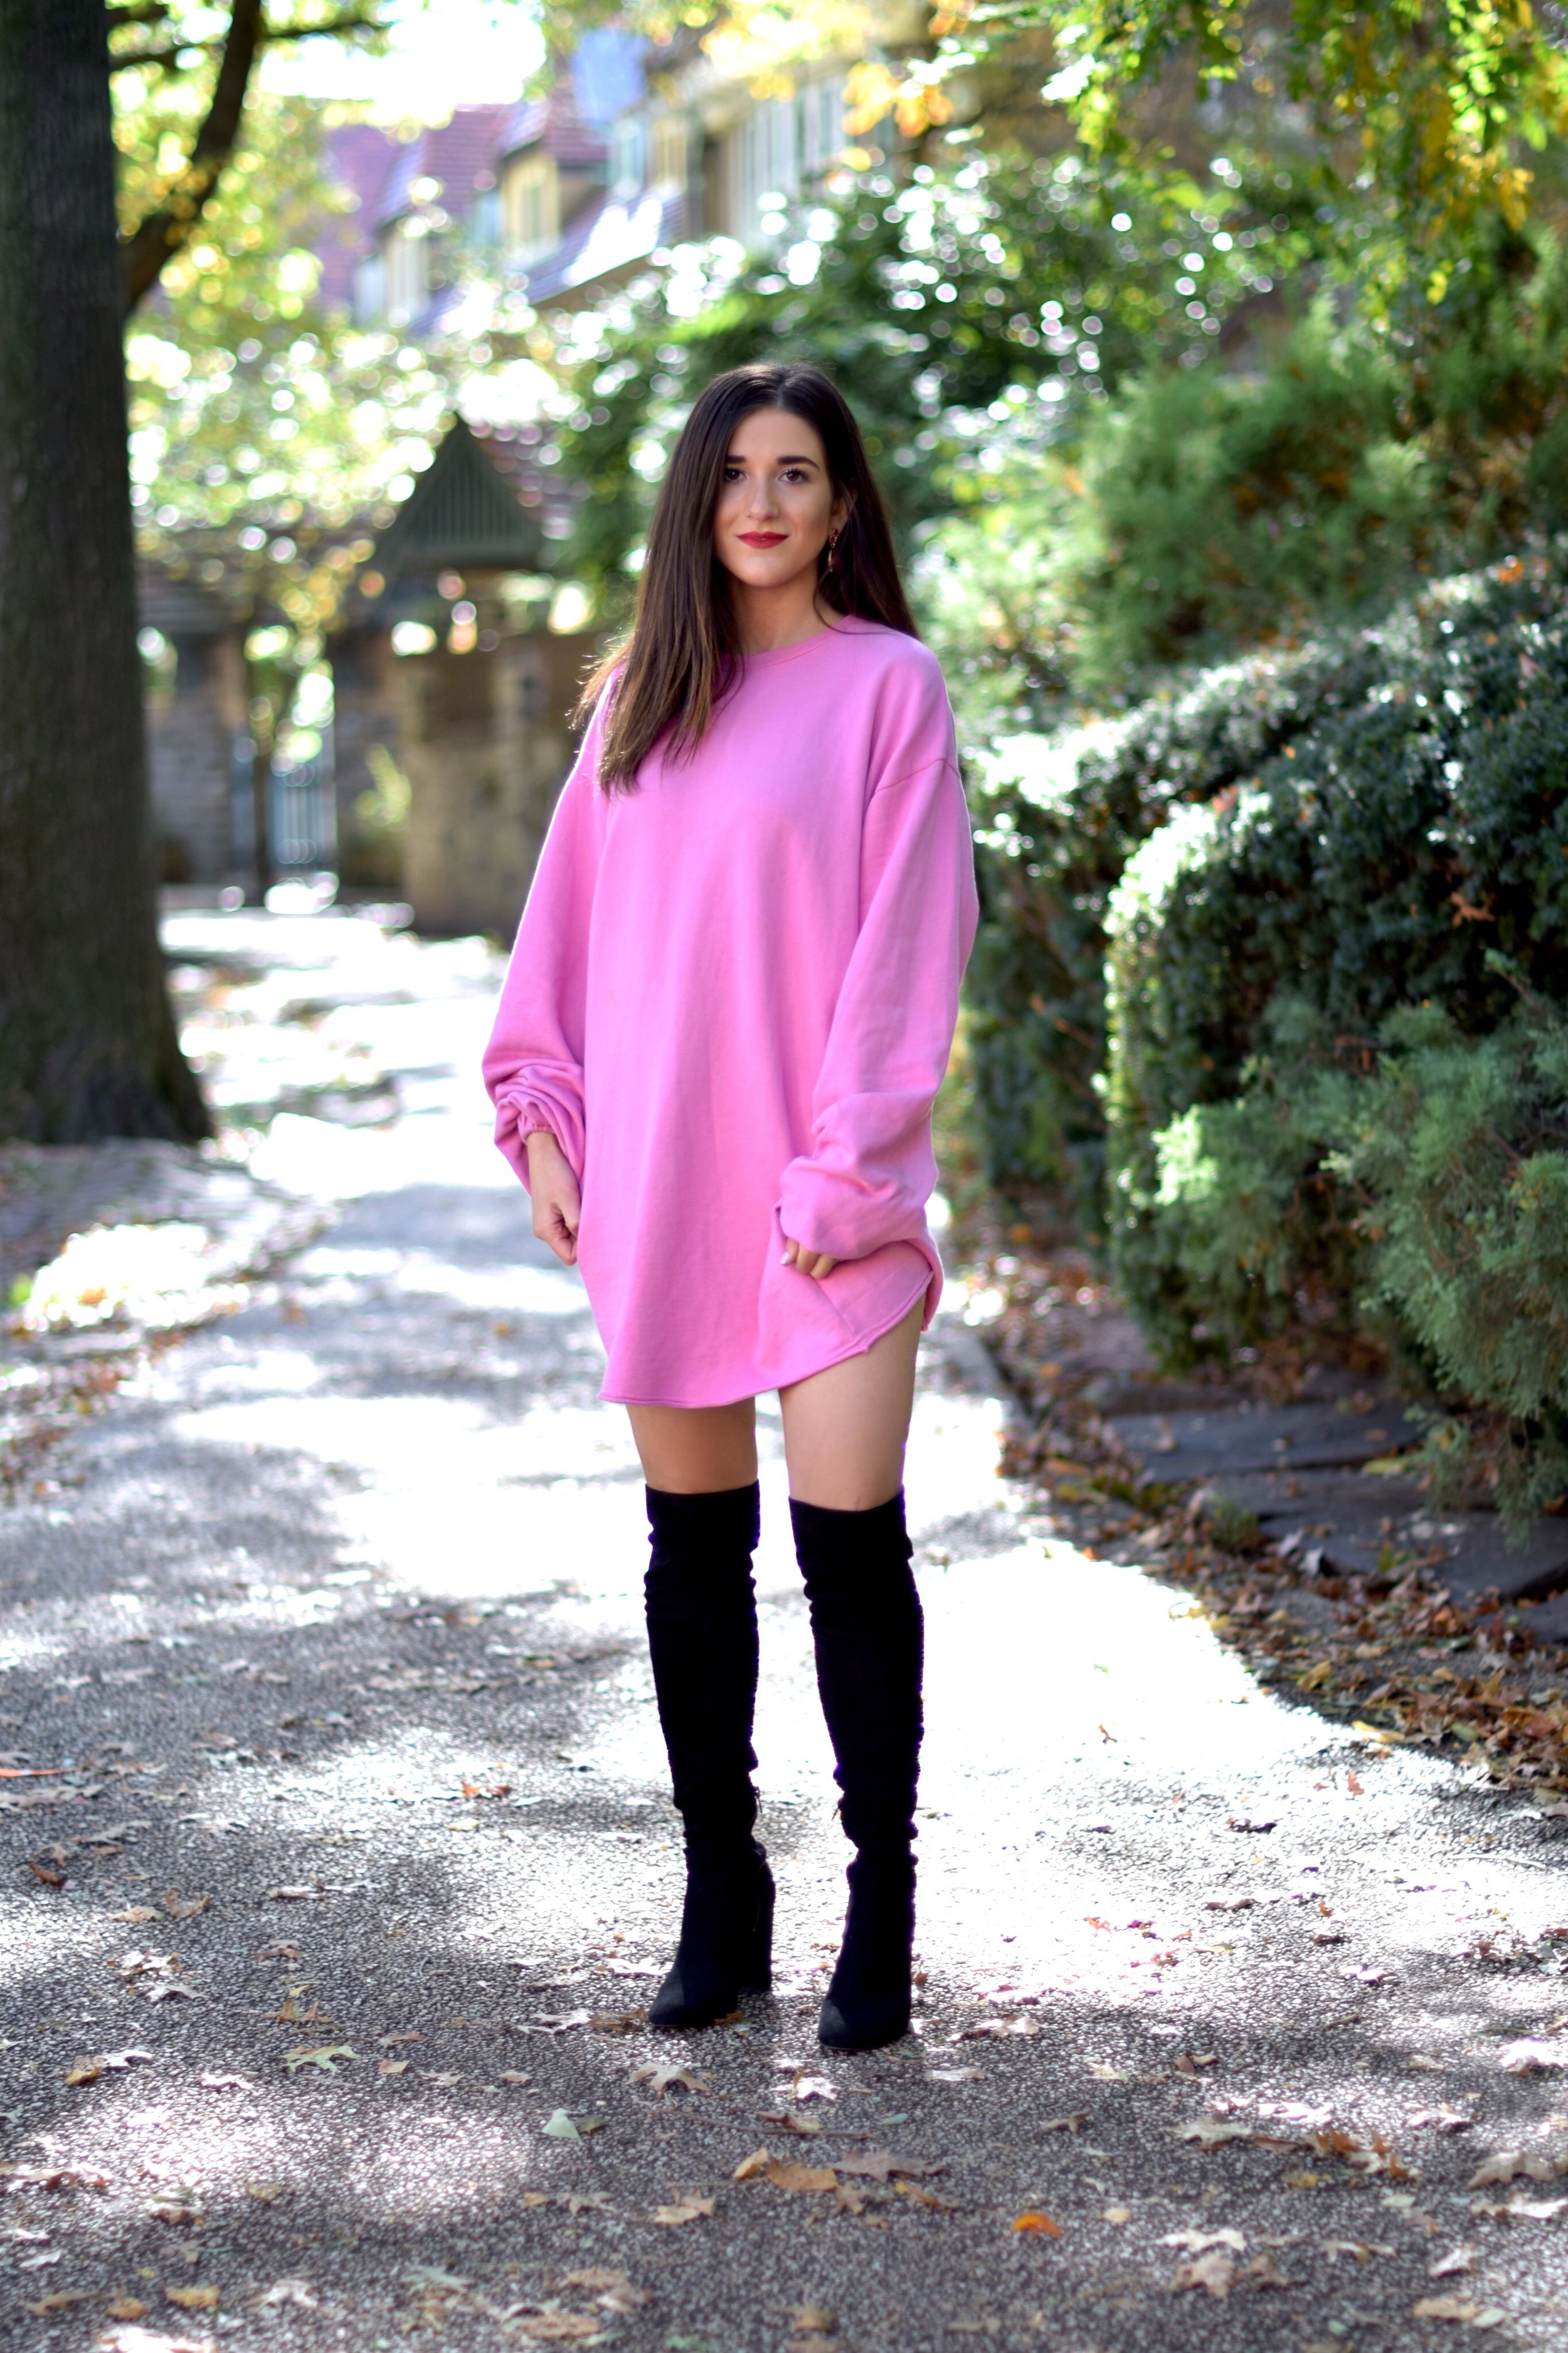 Pink Sweatshirt Dress Black OTK Boots Blogging Before The Days Of Instagram Esther Santer Fashion Blog NYC Street Style Blogger Outfit OOTD Trendy Over The Knee Hair Girl Women  New York Chanel Bag Designer ASOS Pretty Shopping Sale Beautiful Winter.jpg